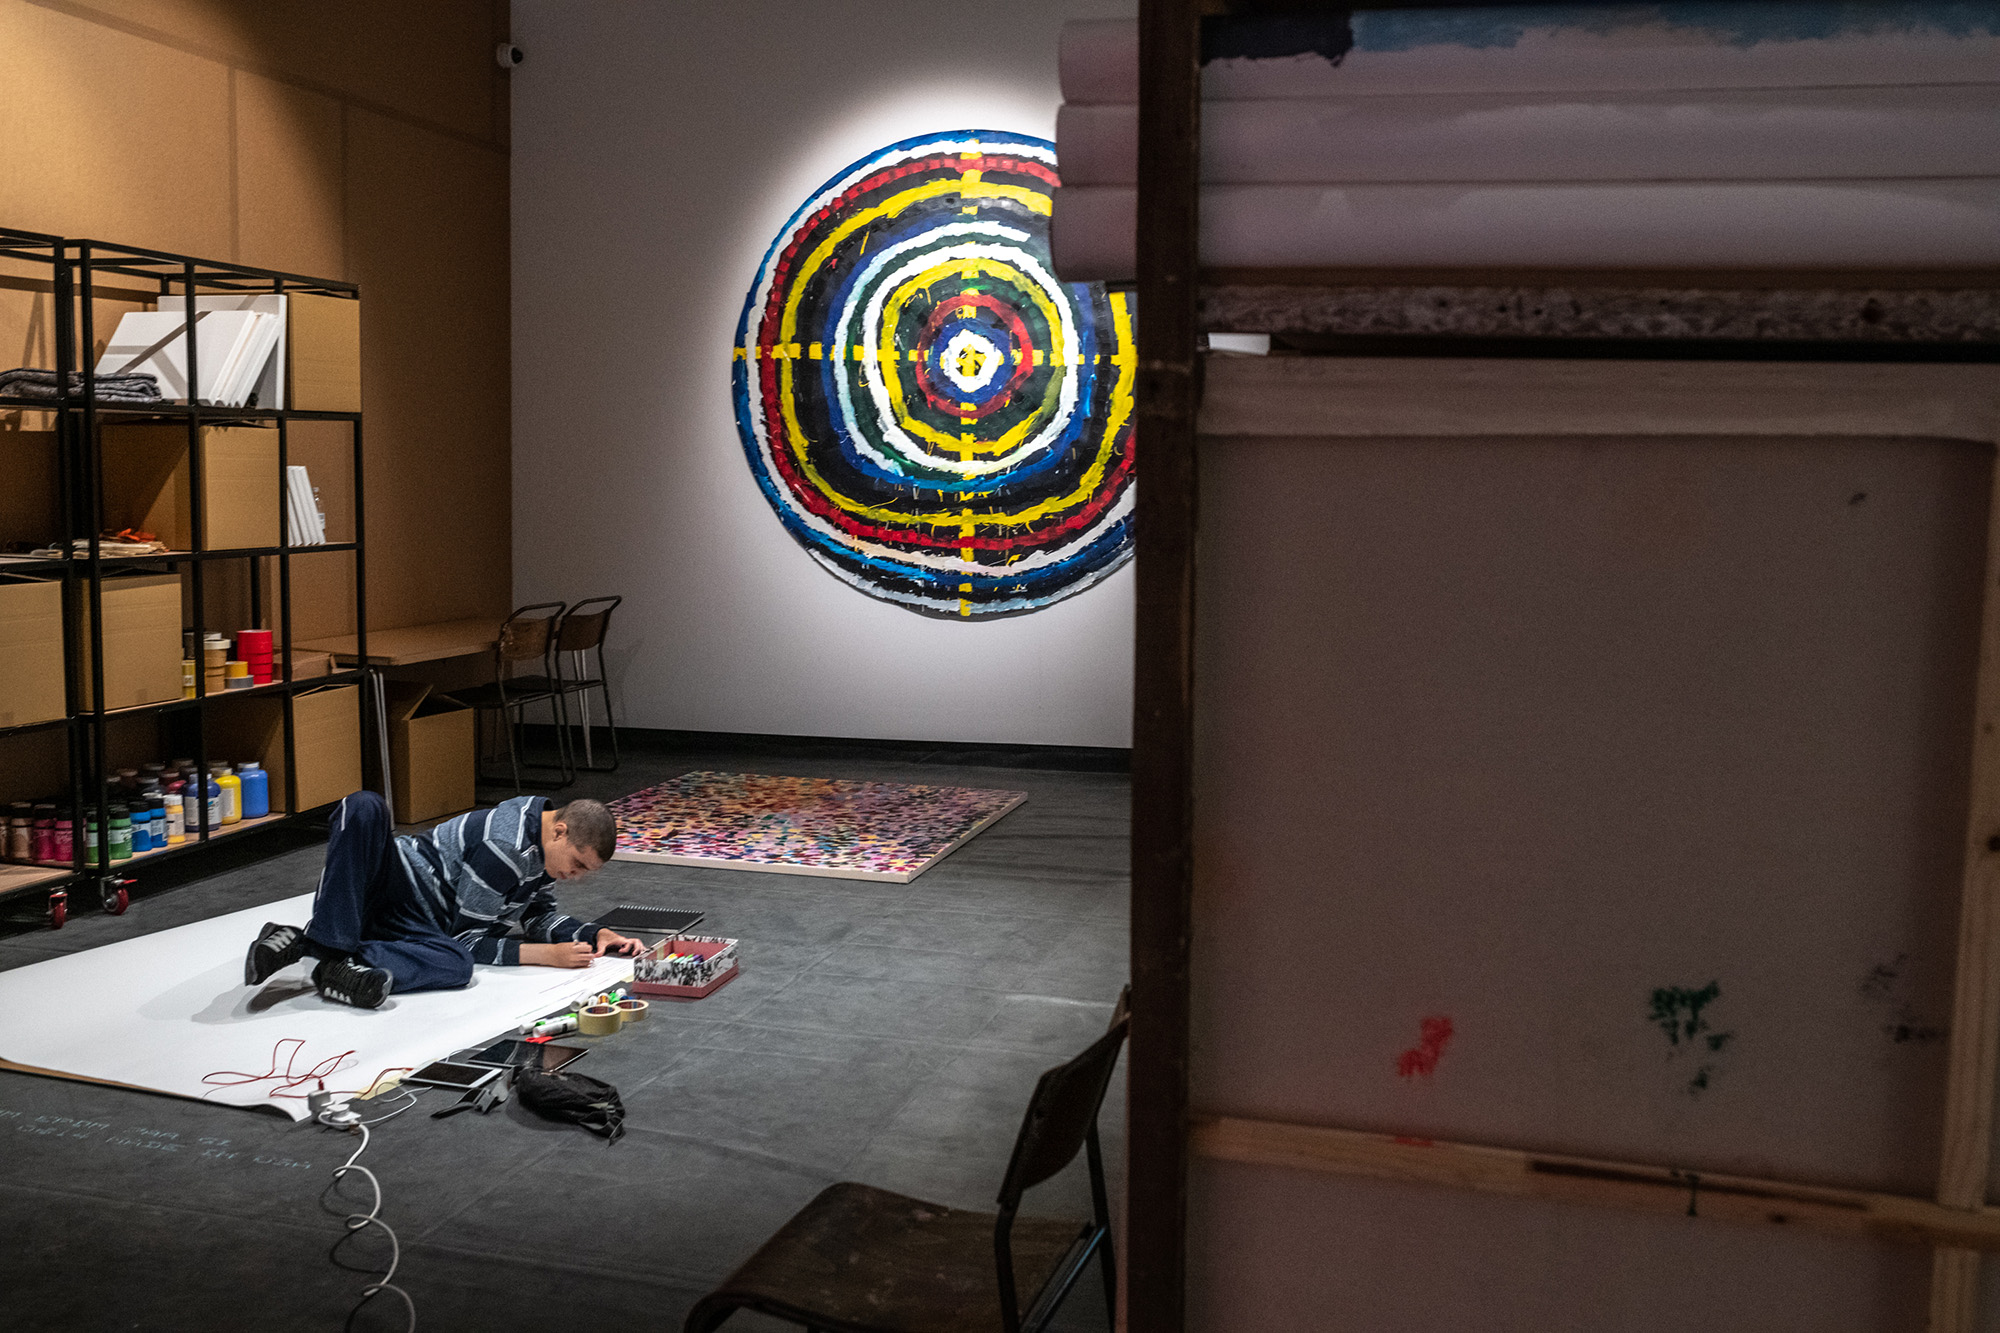 A young man leaning on a large sheet of paper on the ground, about to draw or write on it. On the wall behind him, a colourful, circular artwork is hanging. There are art materials including tape and pens as well as electronic tablets on the floor around him. 